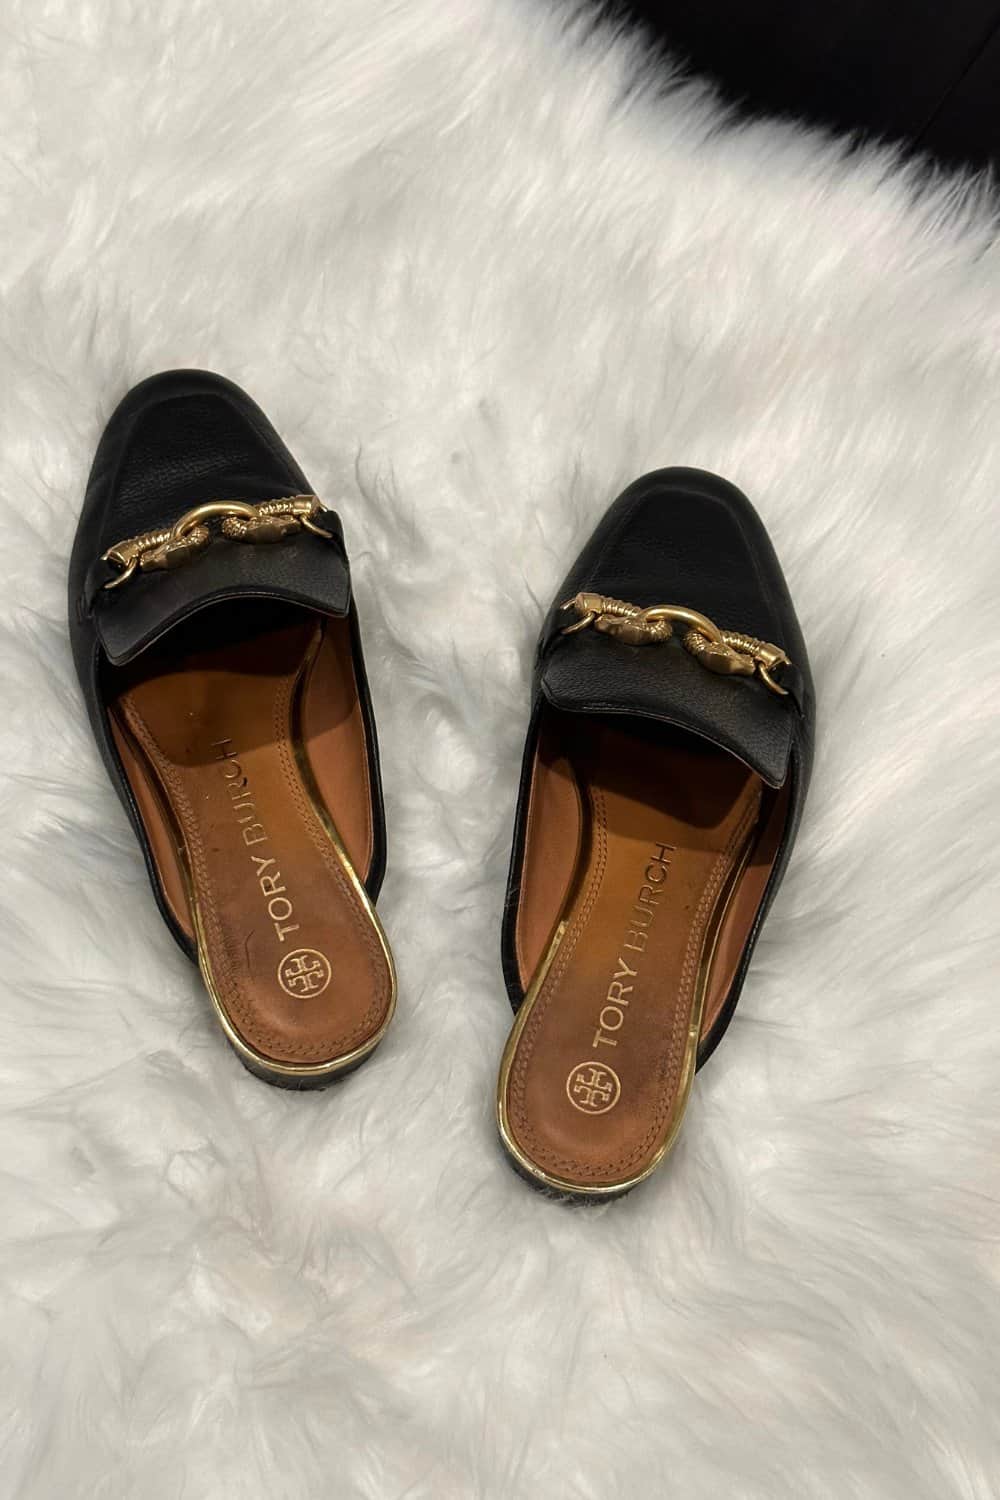 Current condition of the Tory Burch Loafer Mules